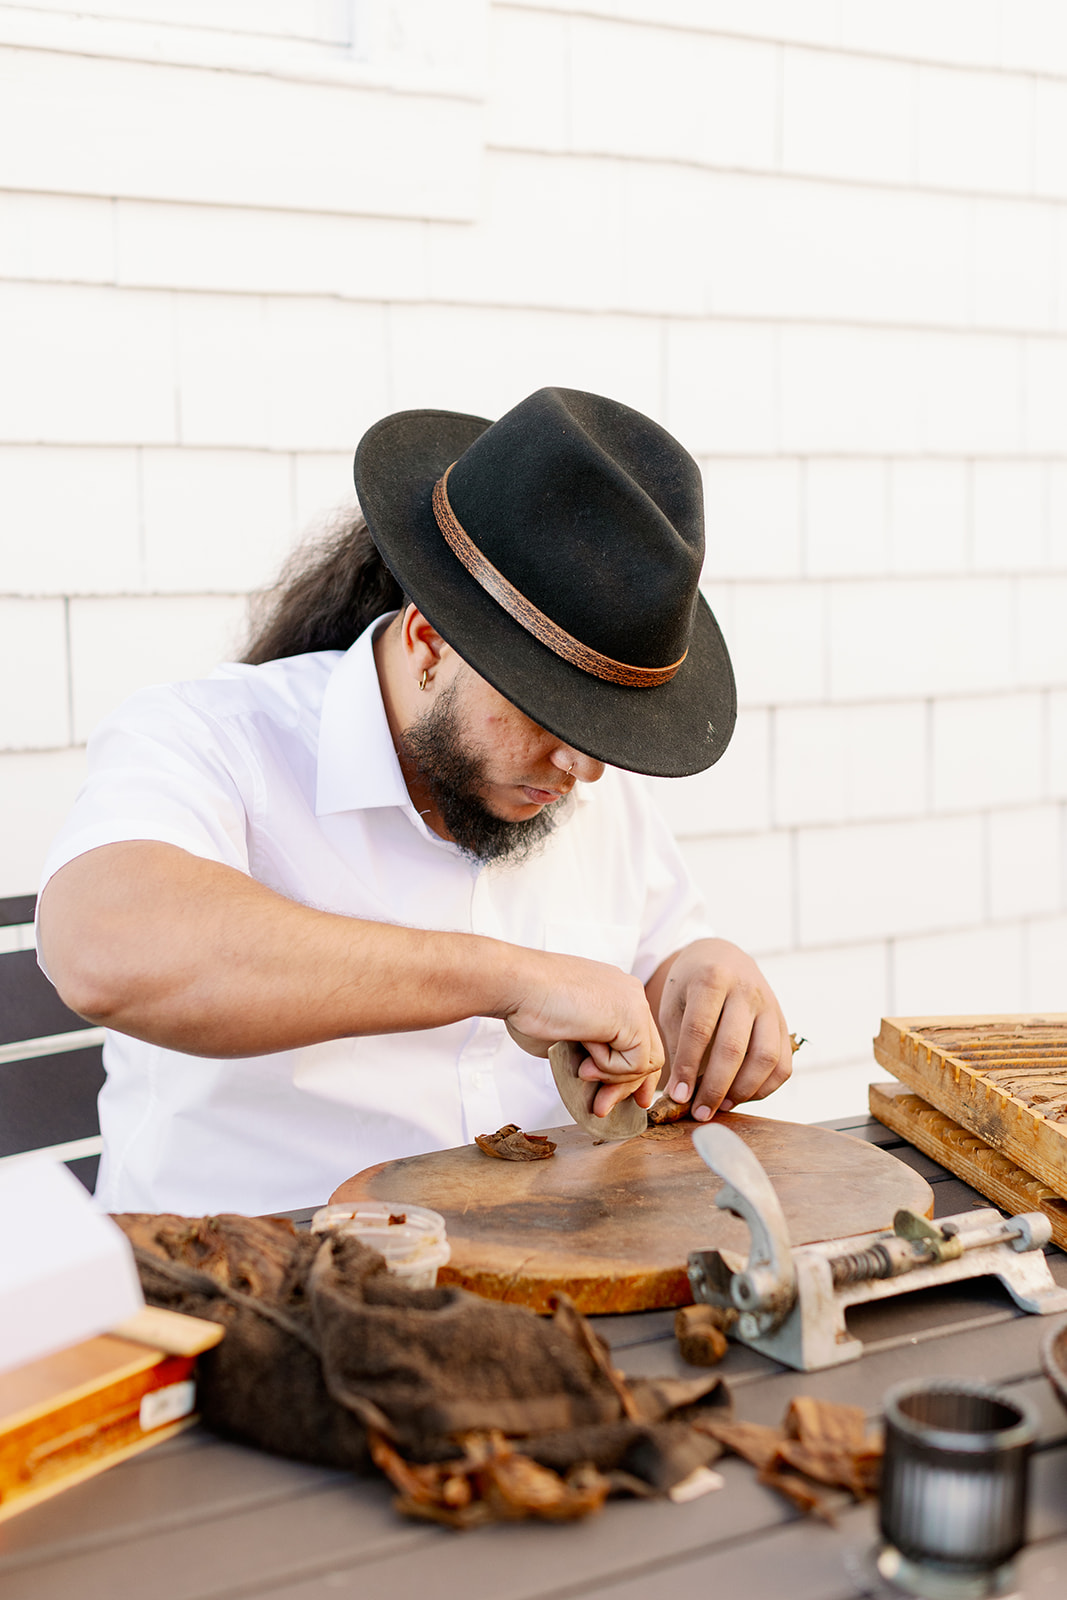 Man making cigars at a Rhode Island wedding welcome party.